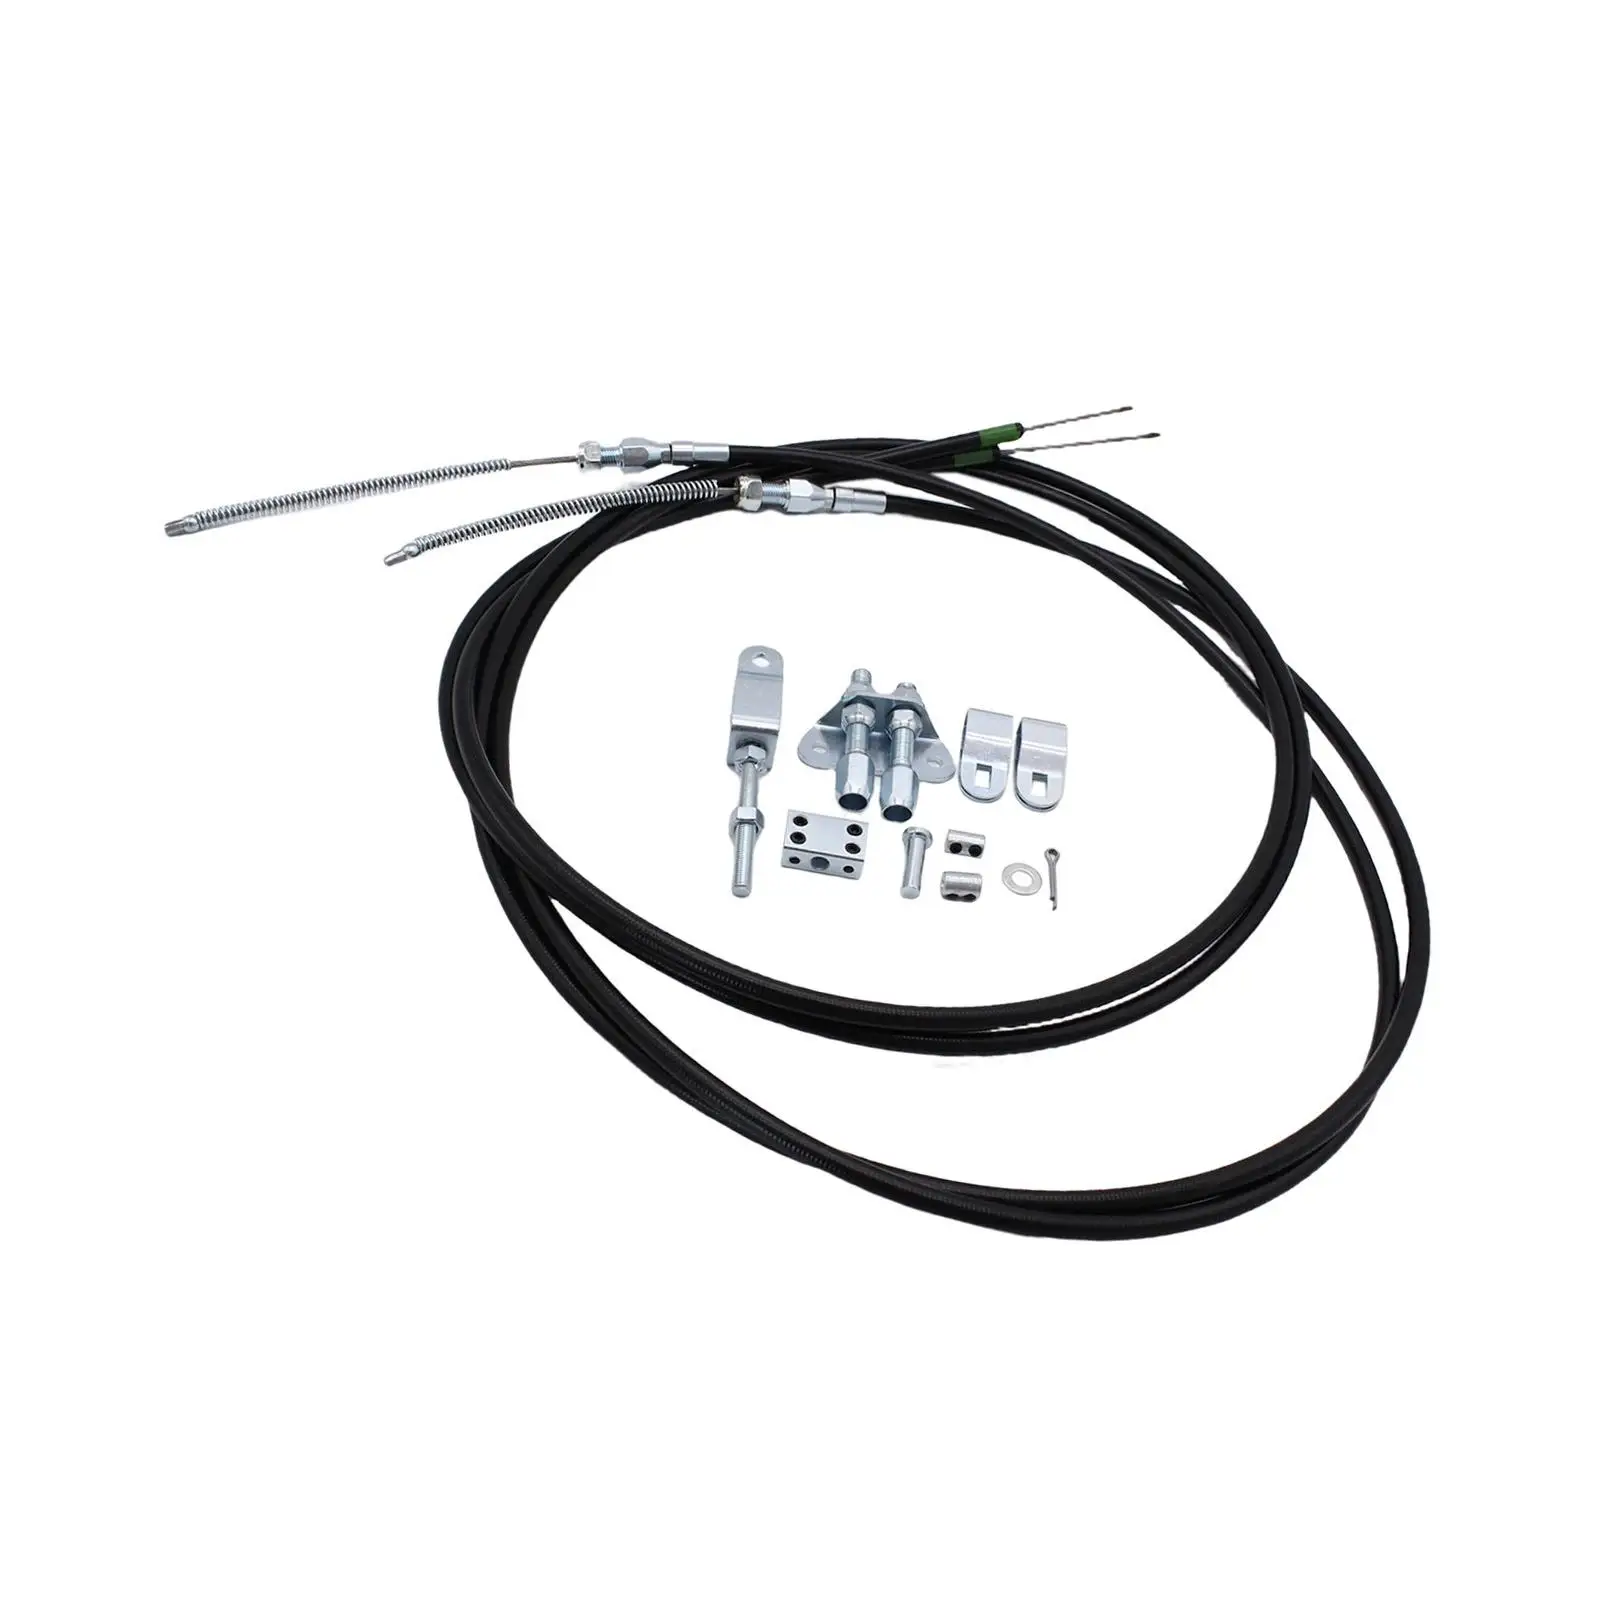 Emergency Parking Brake Cable Set 330-9371 Replaces Adjustable Spare Parts